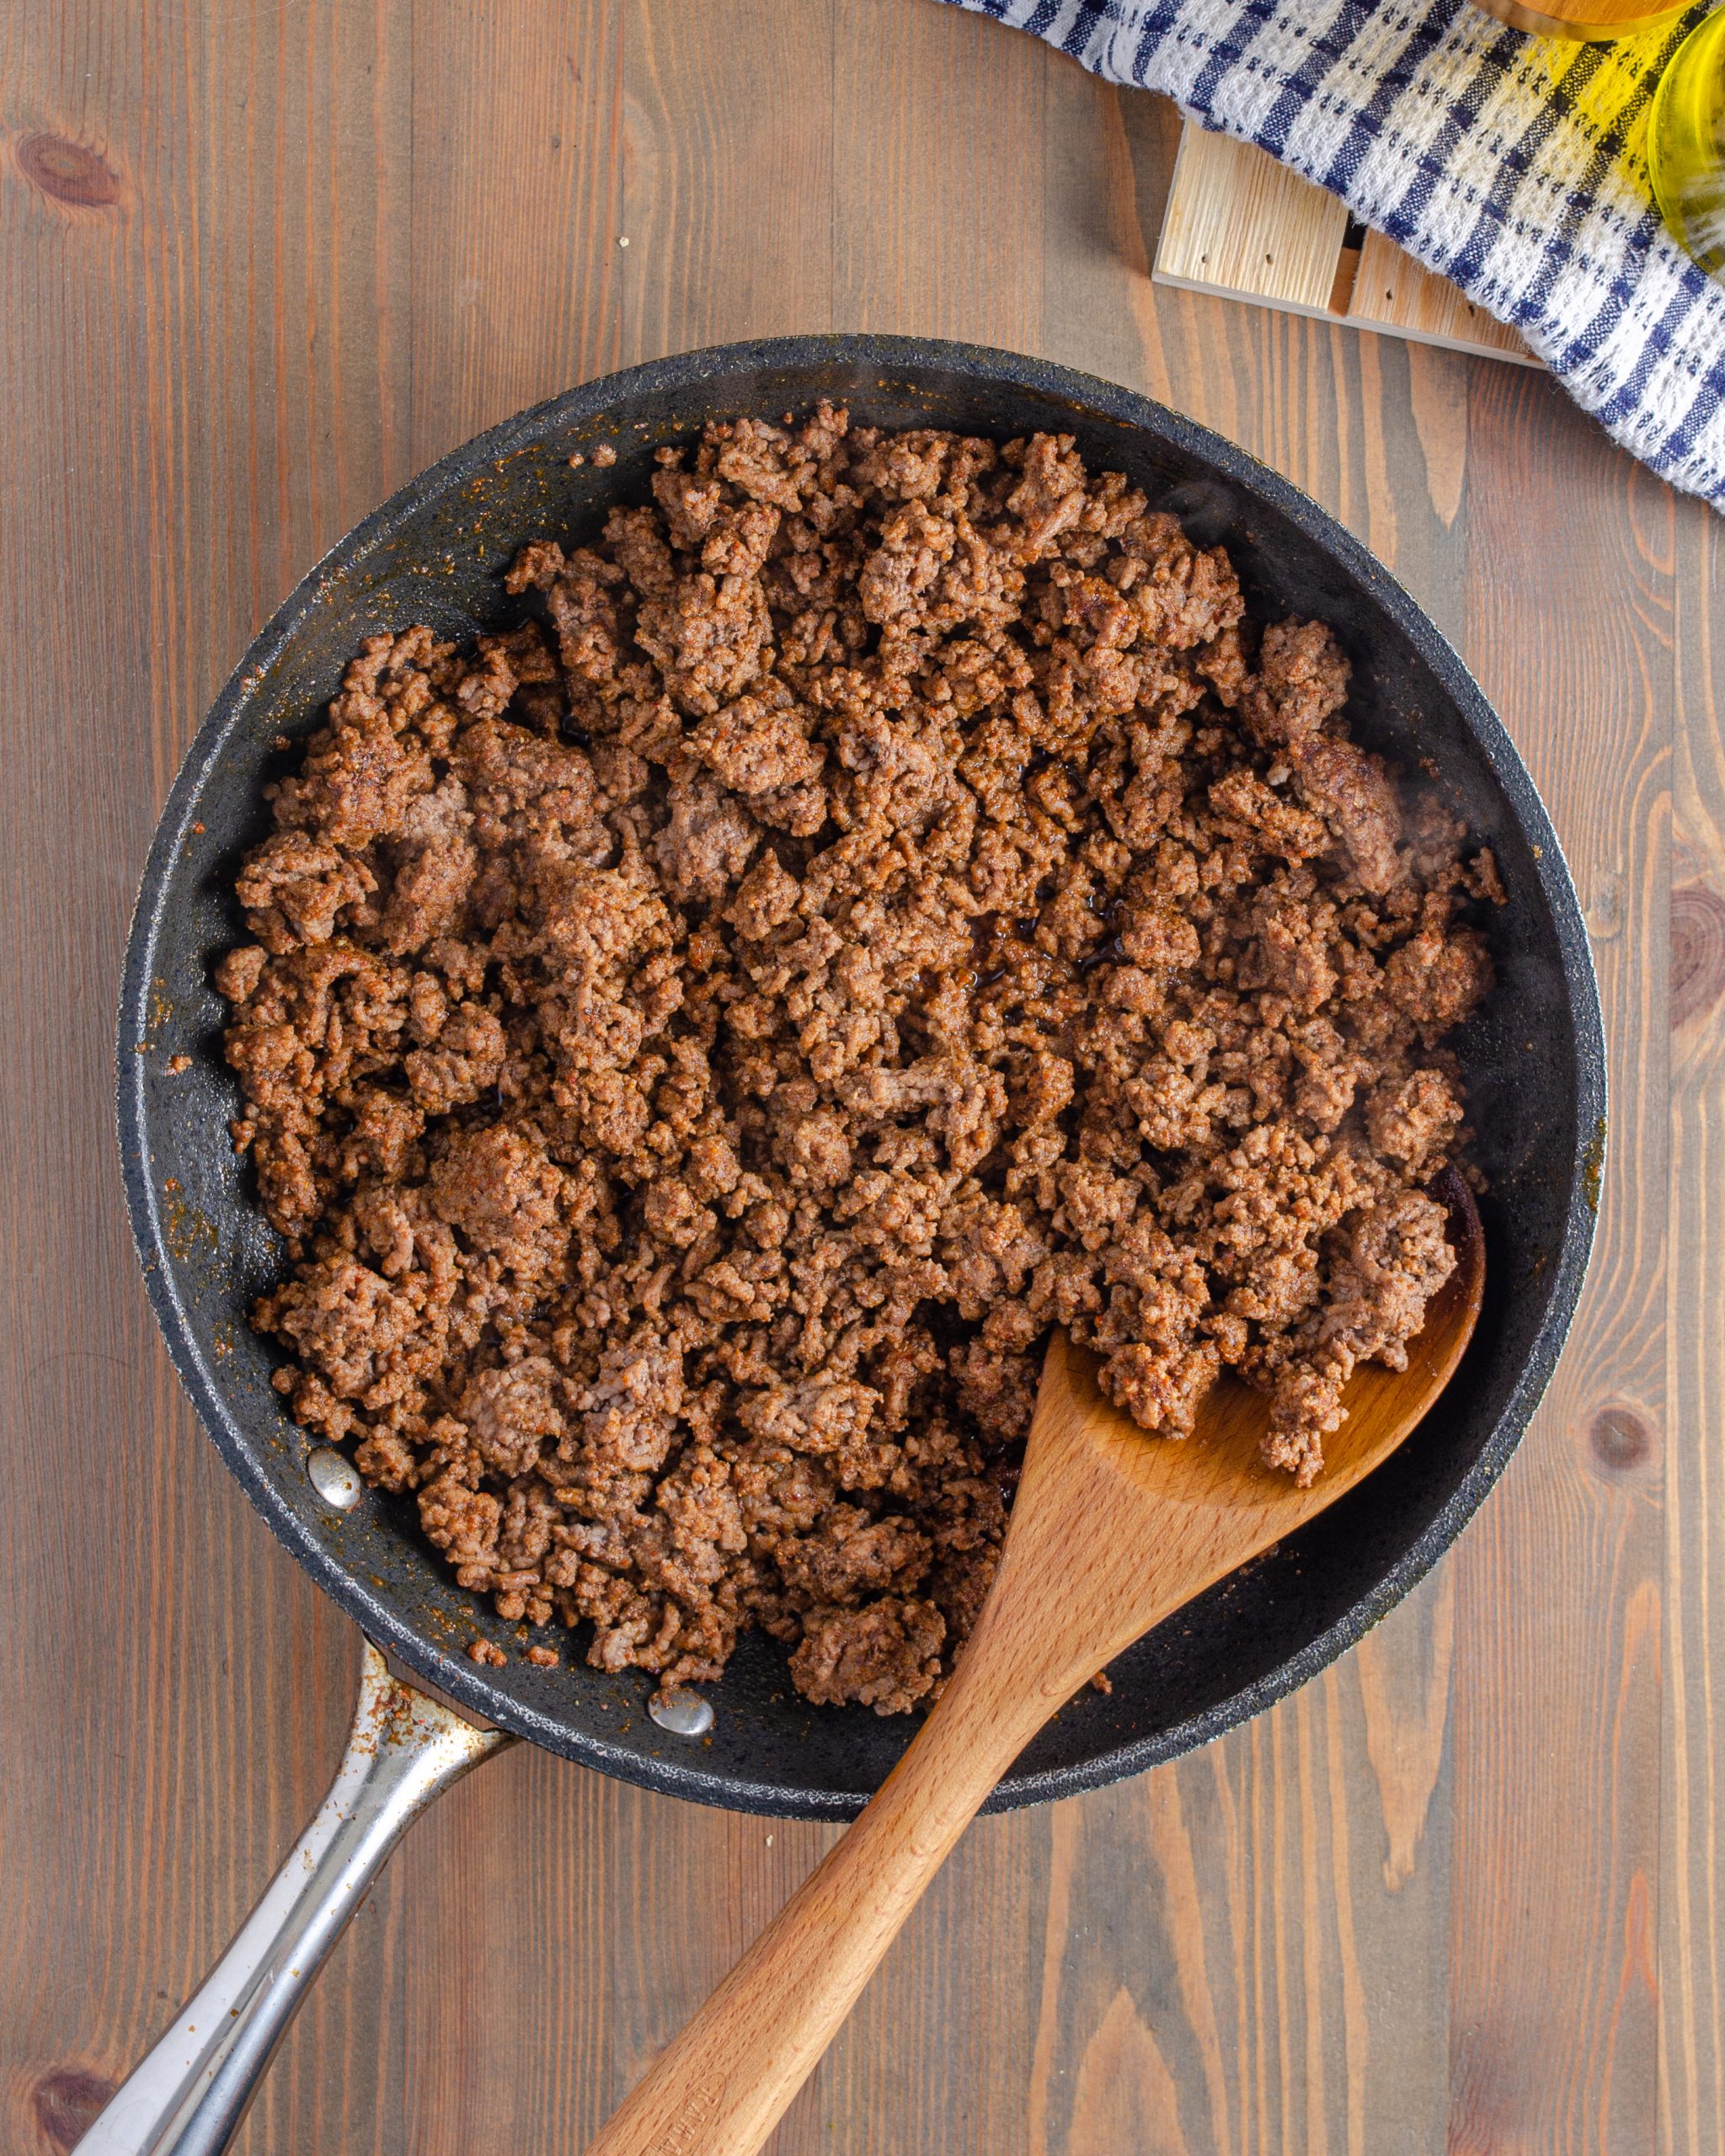 Add the ground beef to a skillet over medium-high heat on the stove. Saute until browned completely. Drain any excess grease. 